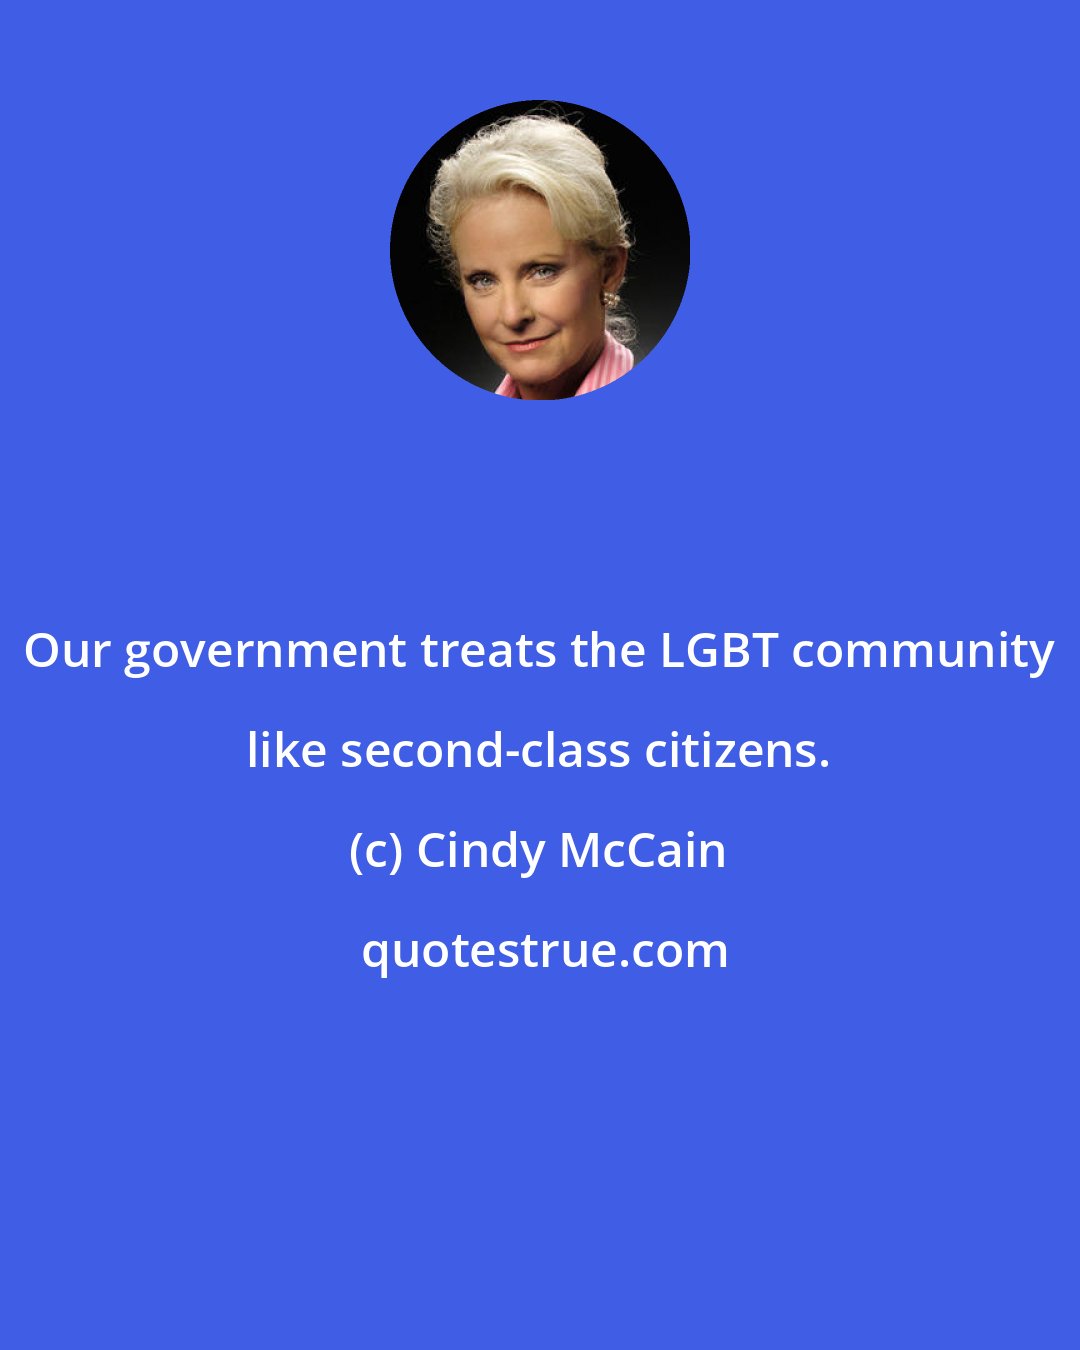 Cindy McCain: Our government treats the LGBT community like second-class citizens.